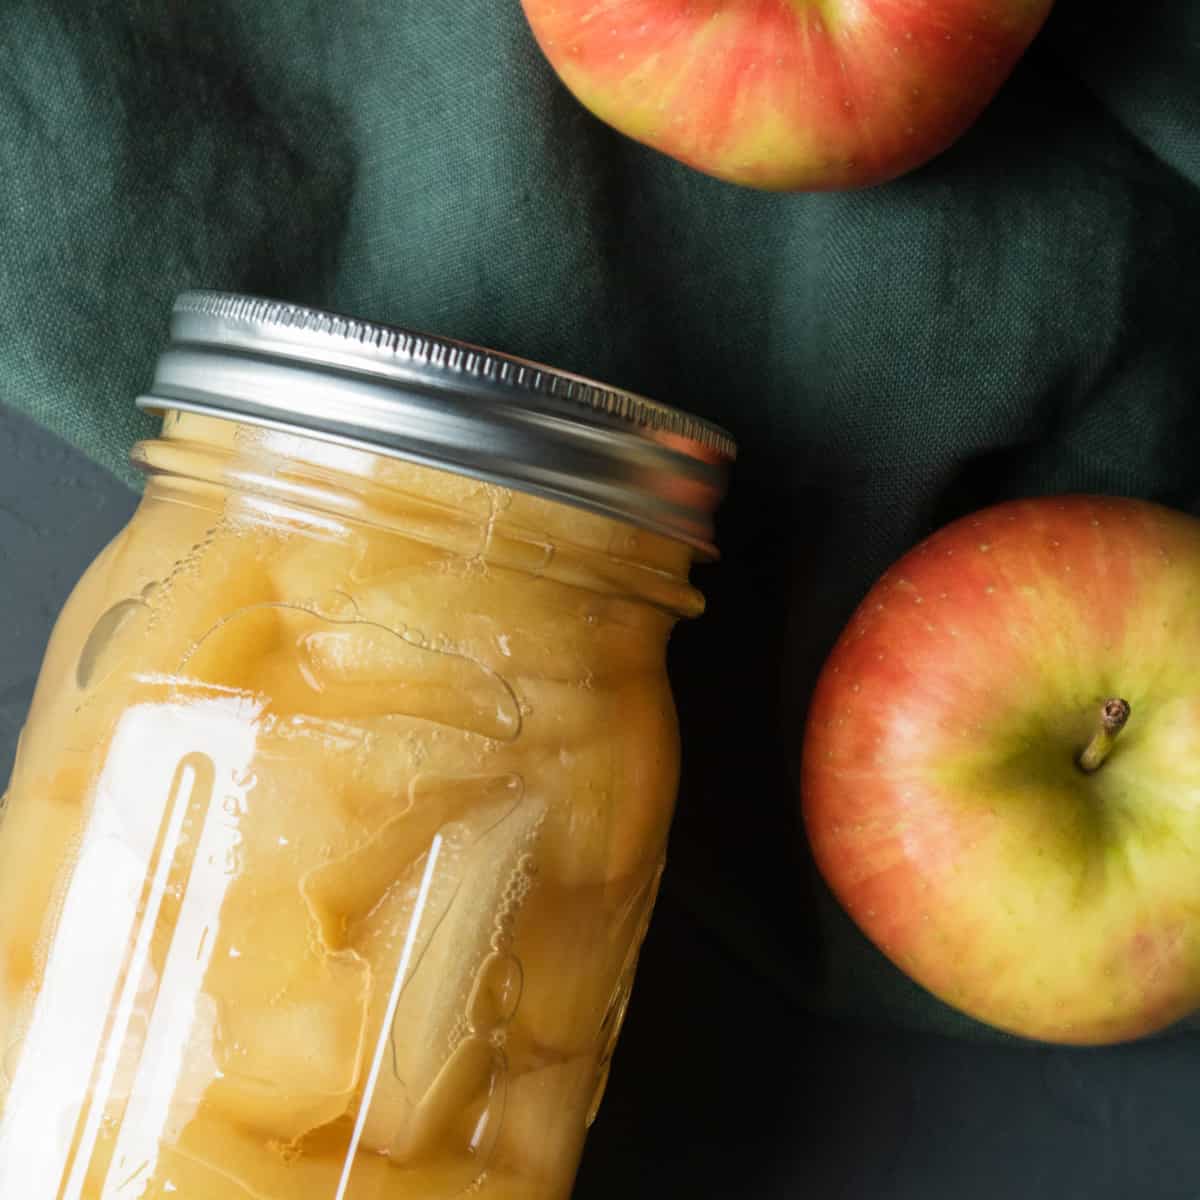 Canning apples with a water bath canner